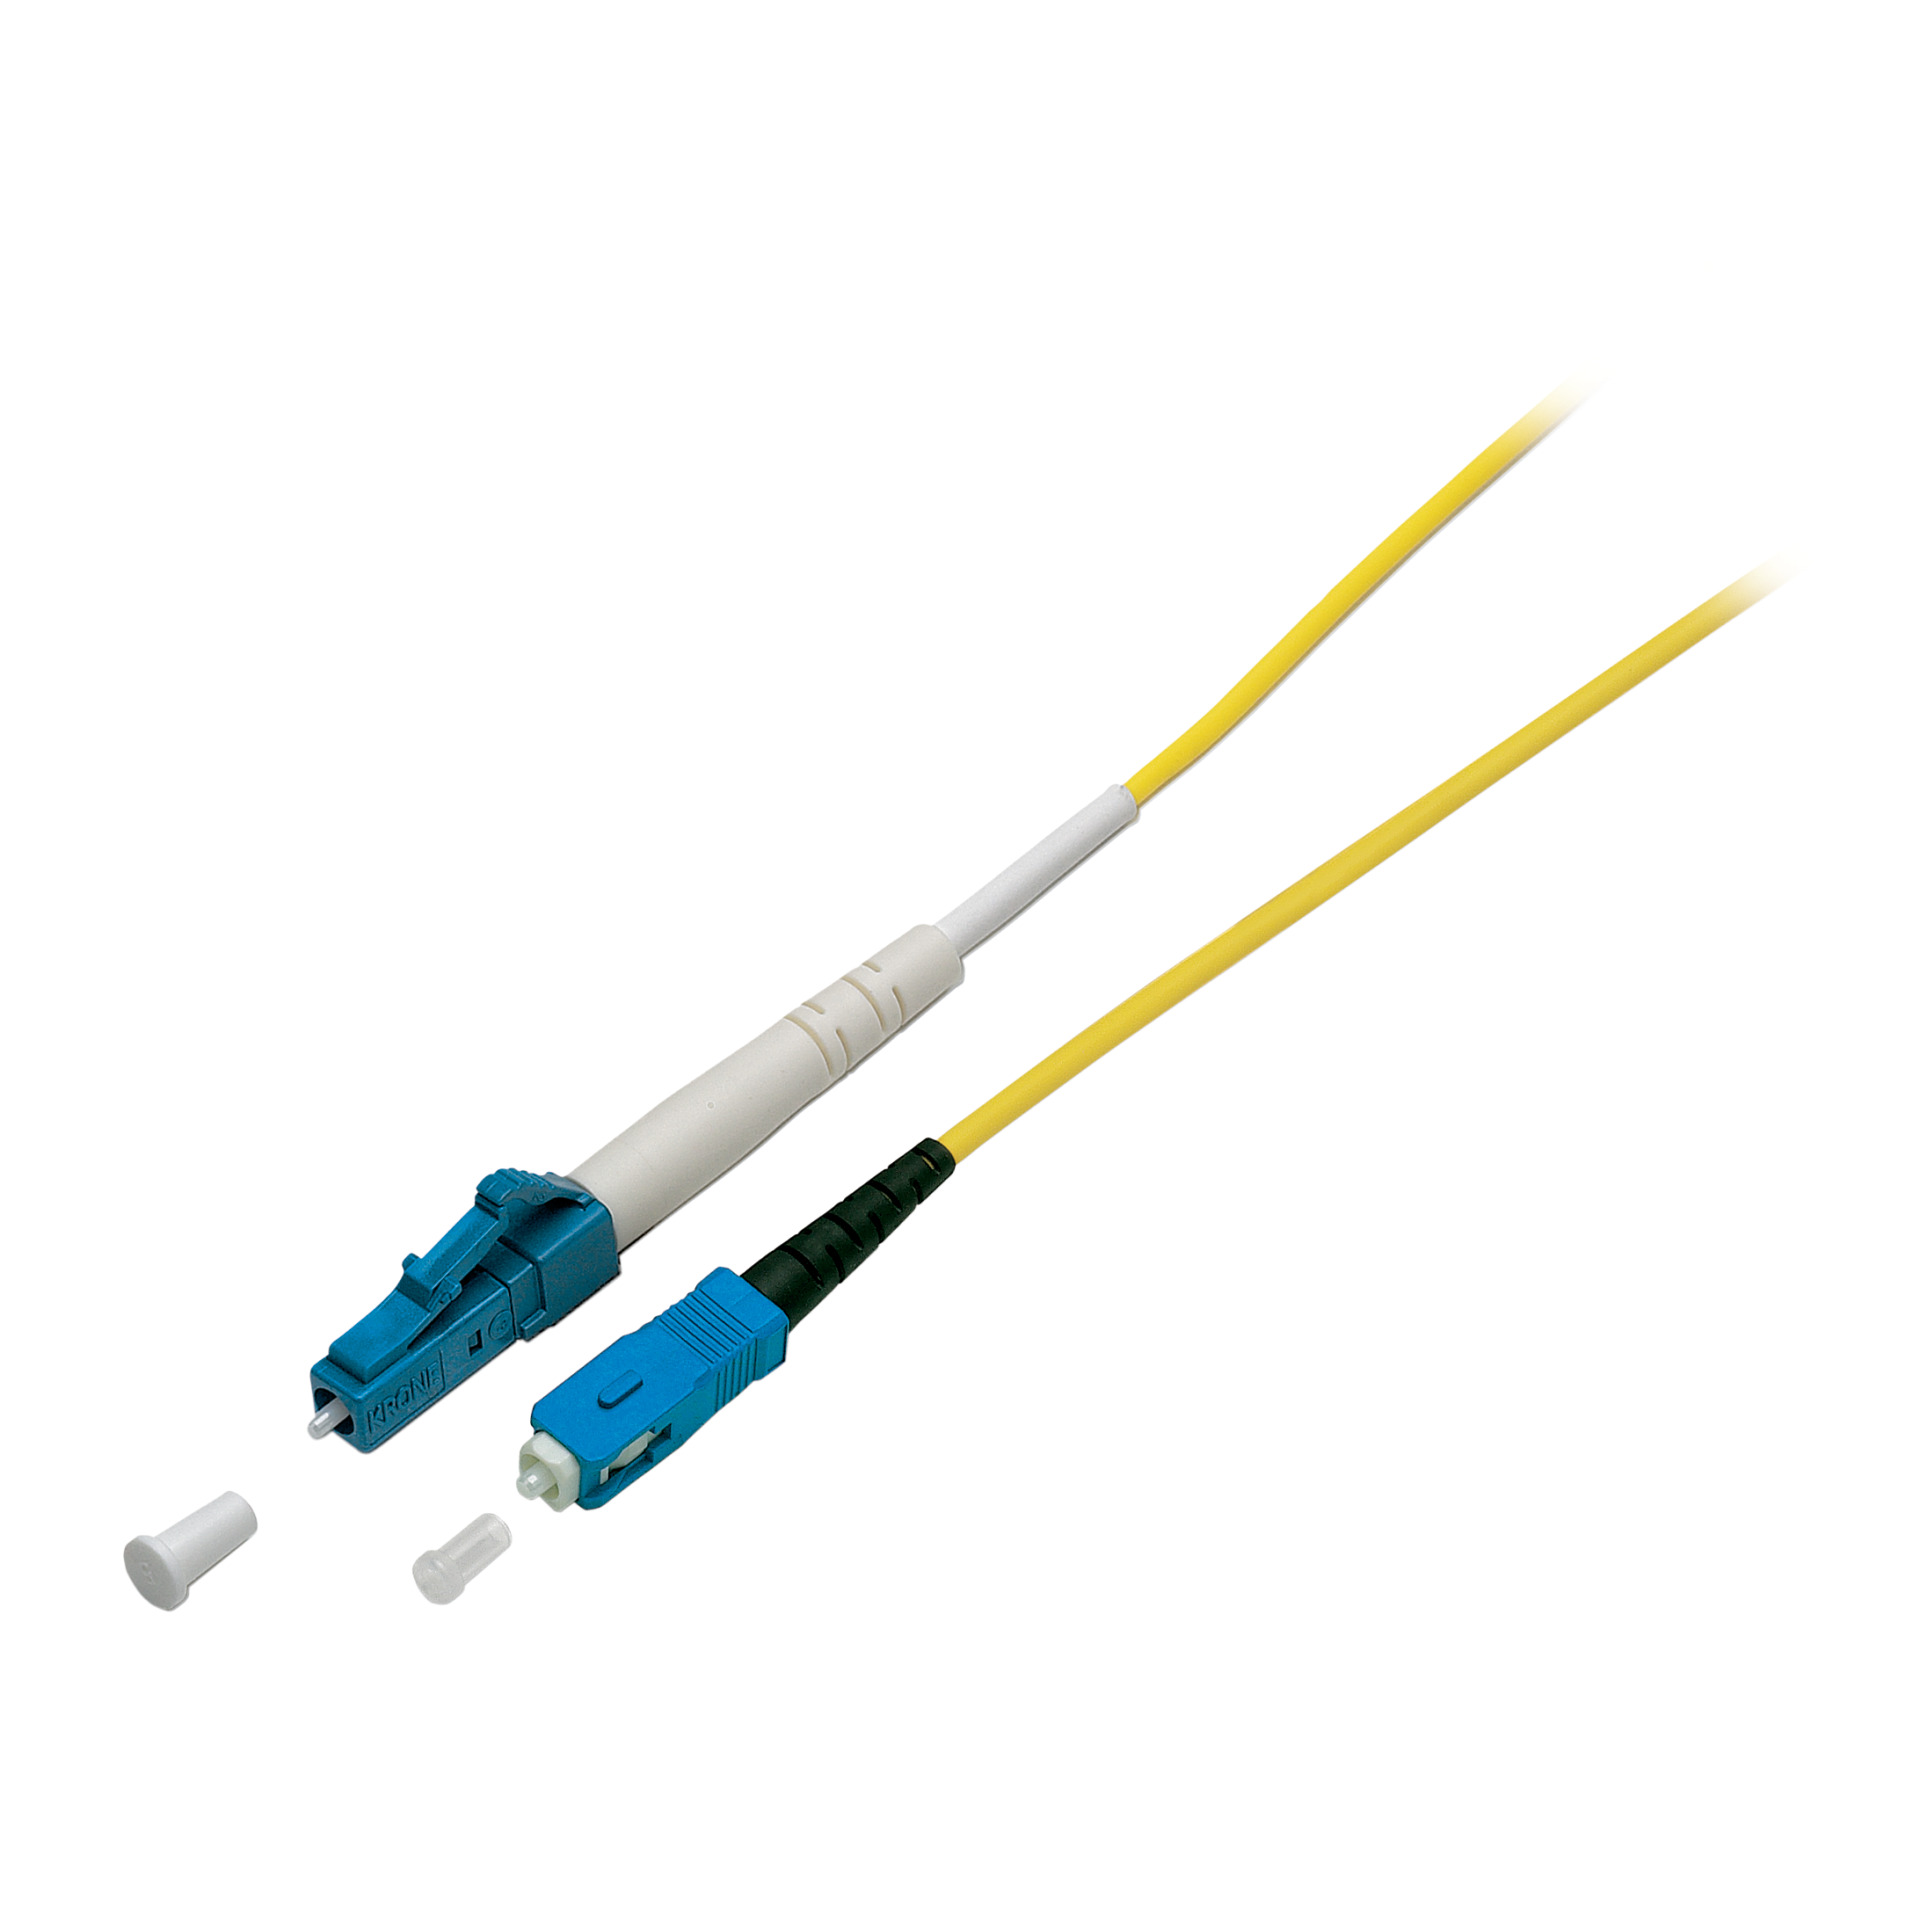 Simplex FO Patch Cable LC-SC G657.A2 5m 2,0mm yellow 9/125µm